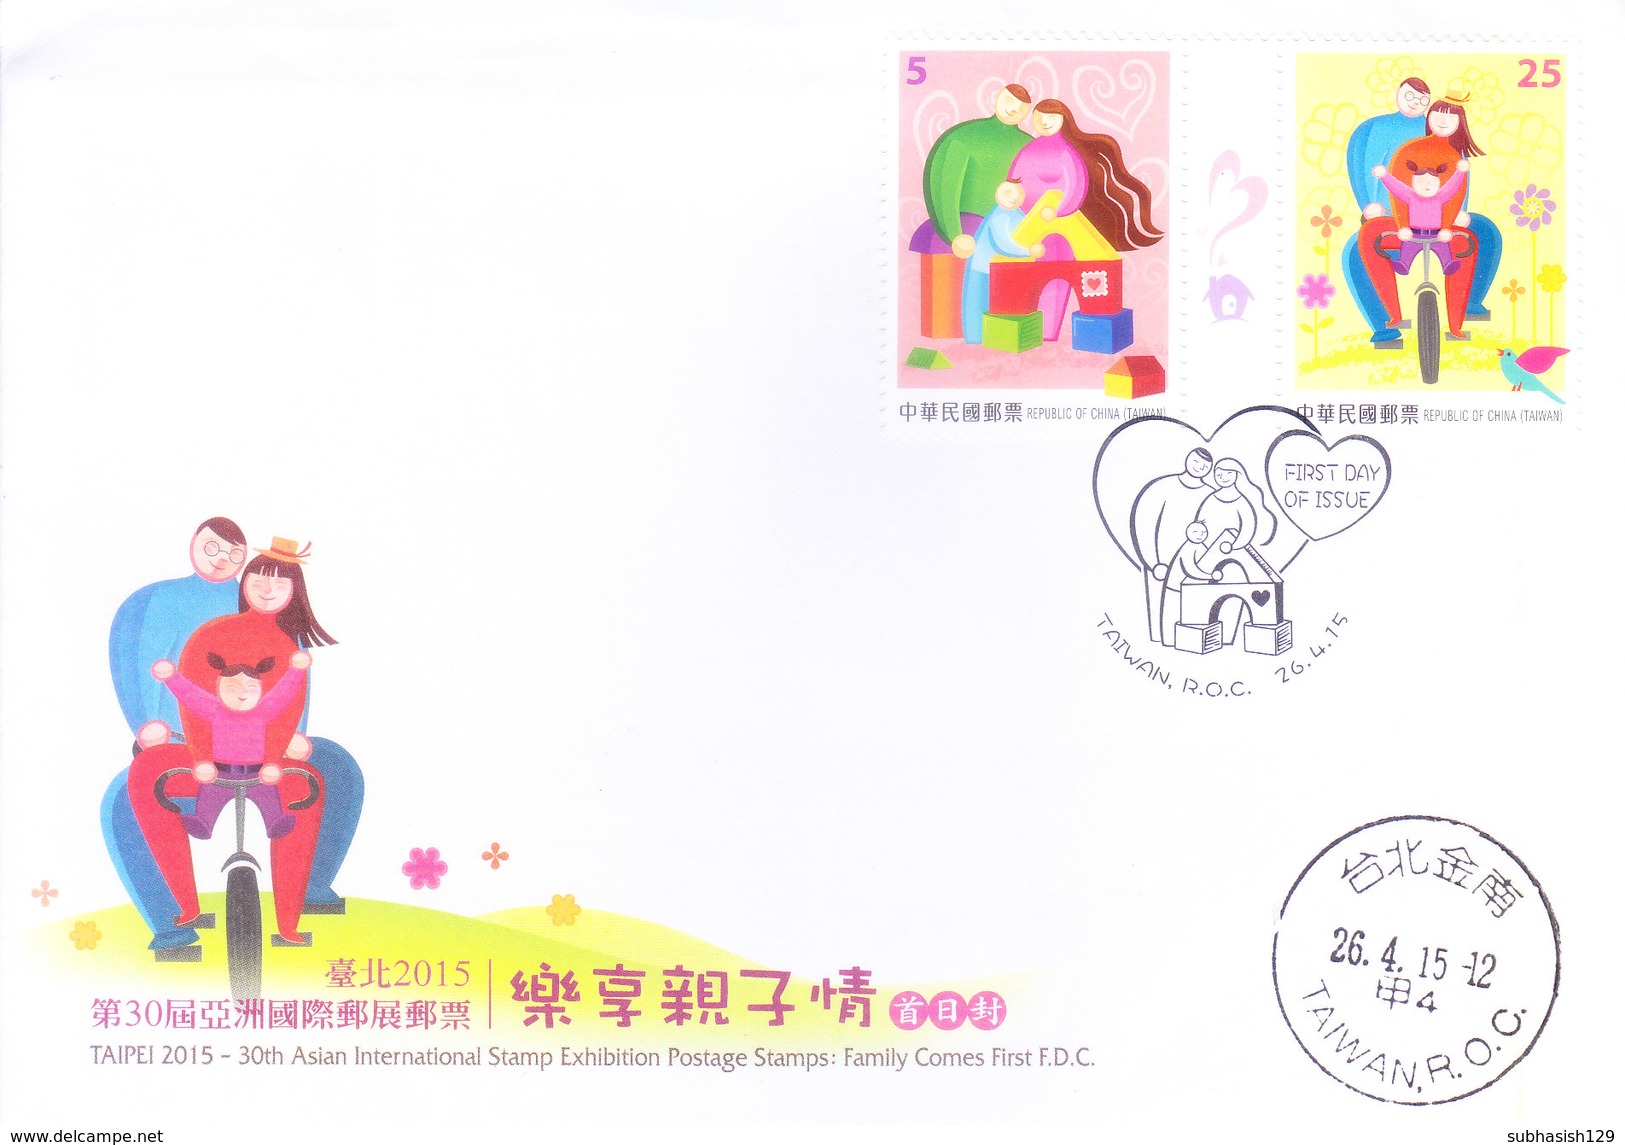 TIWAN 26-04-2015 - FIRST DAY COVER - TAIPEI 2015, 30TH ASIAN INTERNATIONAL STAMP EXHIBITION - FAMILY COMES FIRST - 2V - Covers & Documents